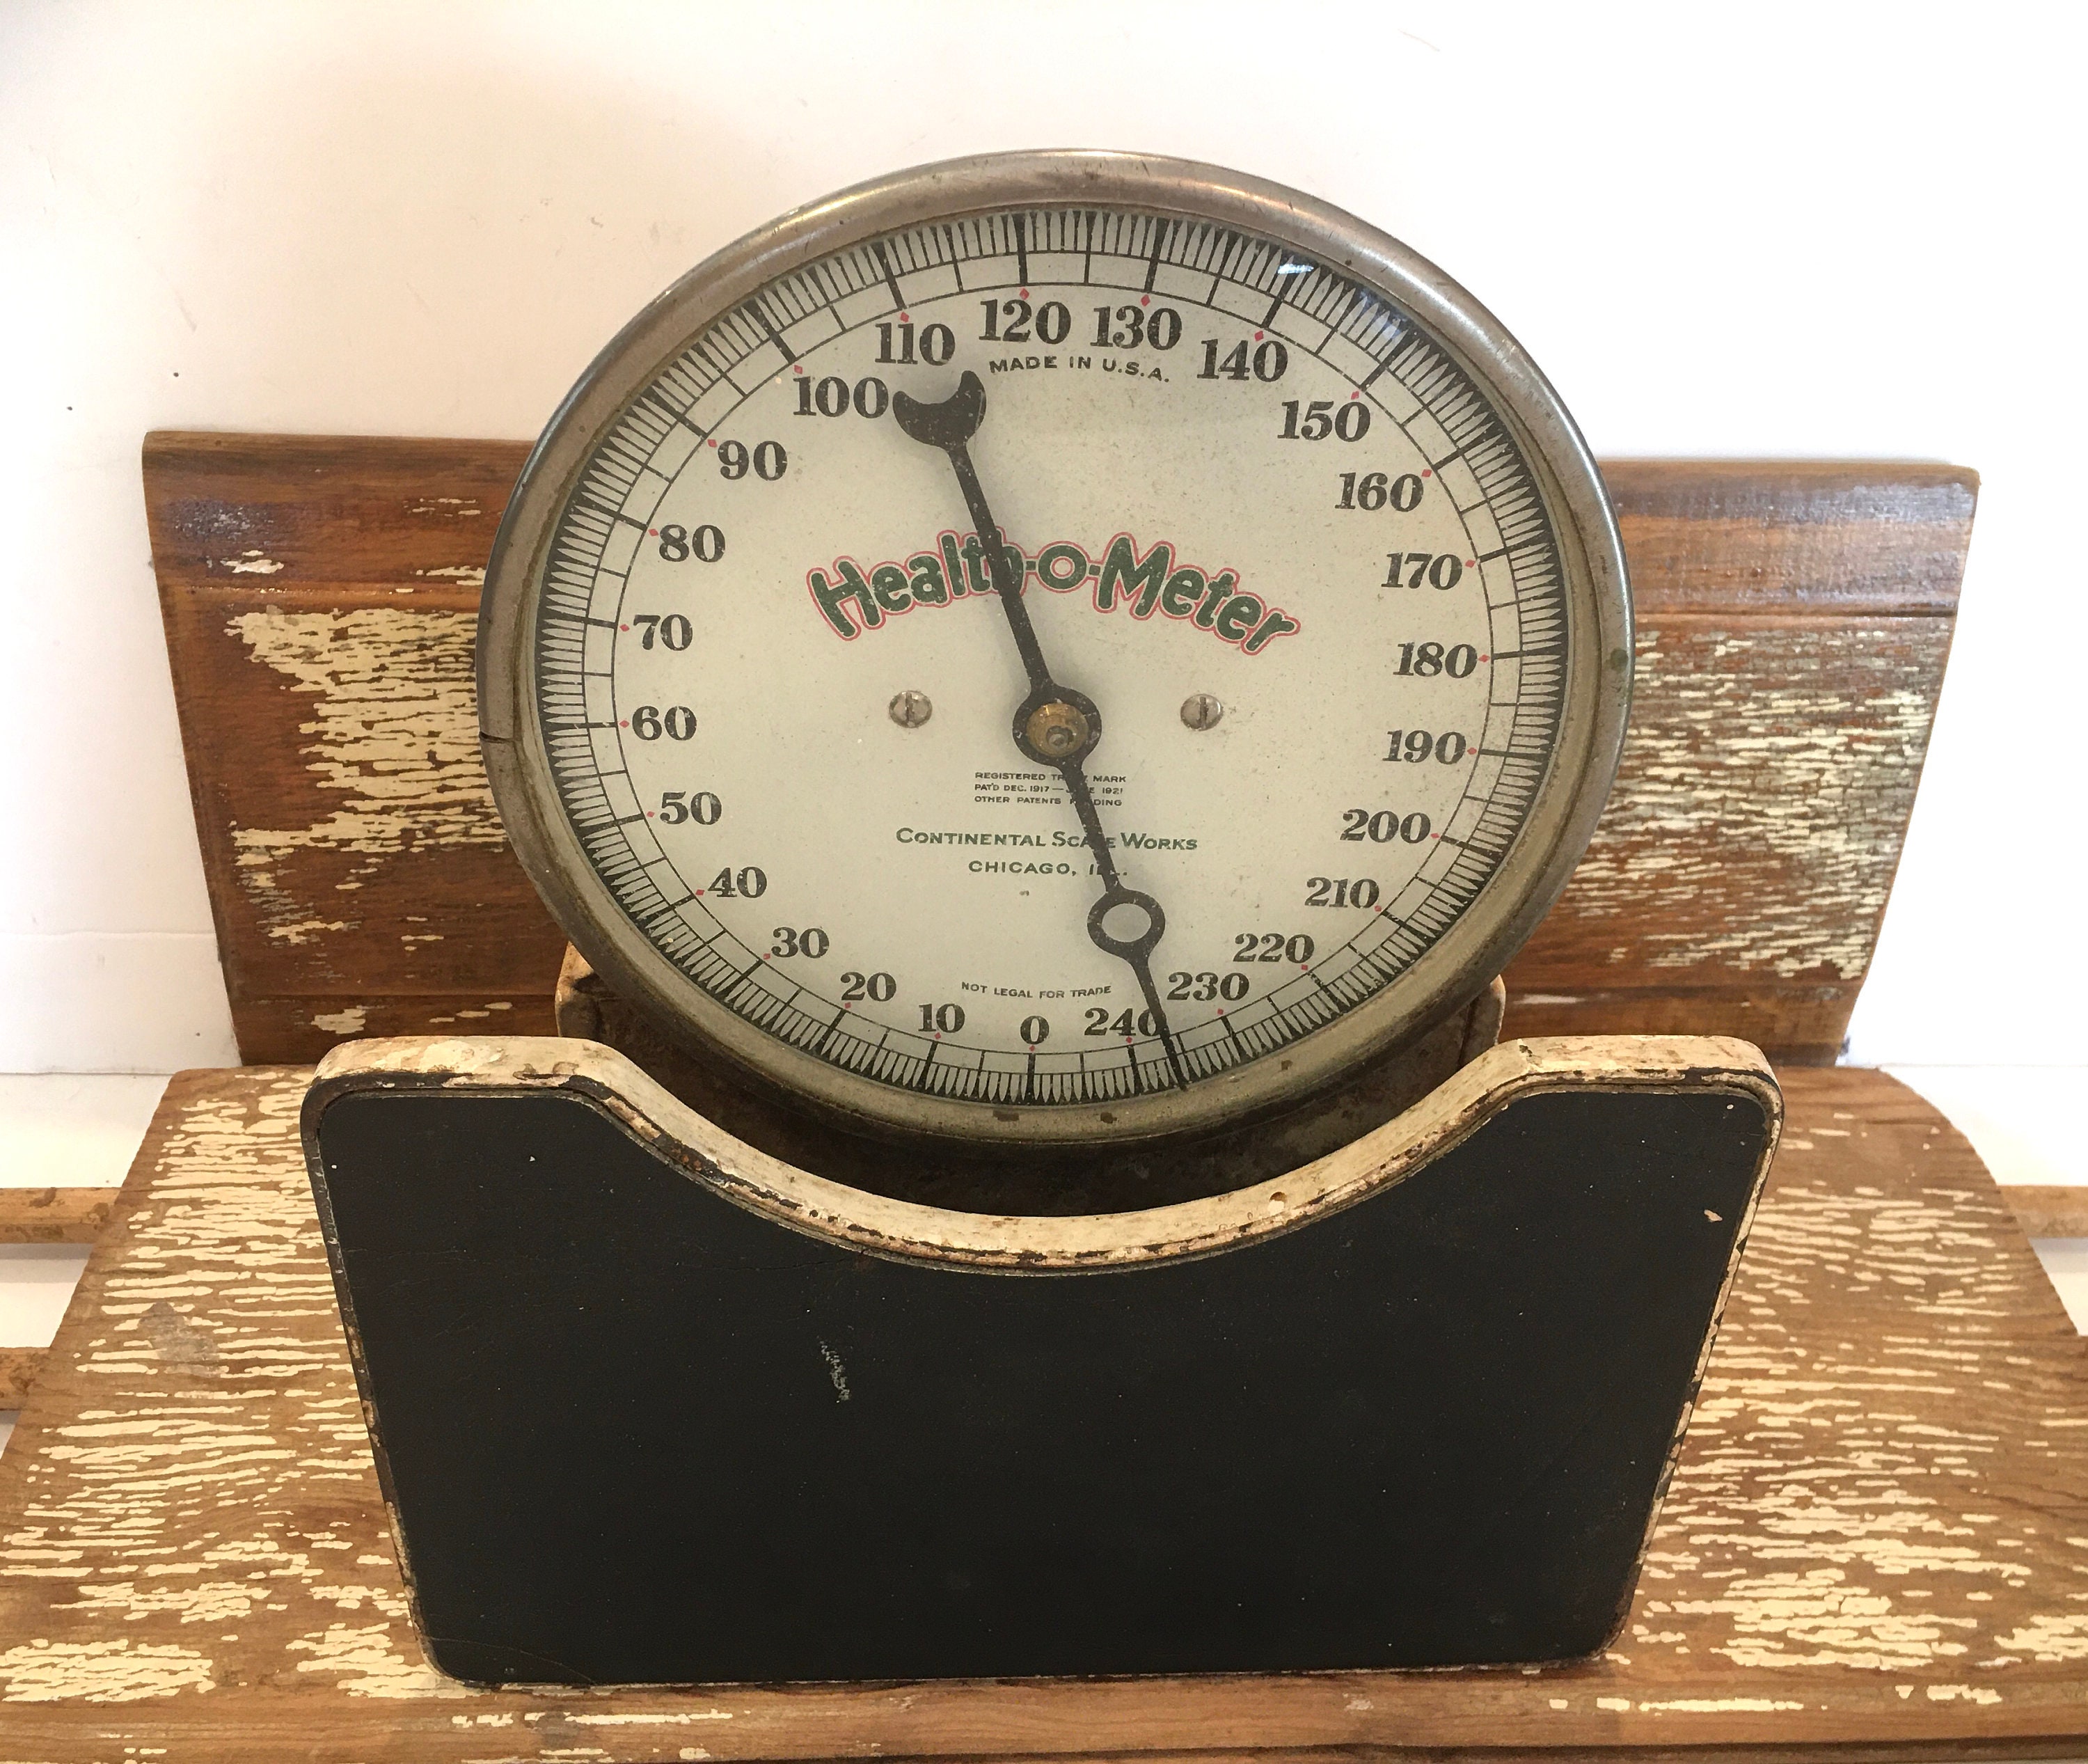 Antique Health O Meter Bathroom Scale,early 1900s,works,black